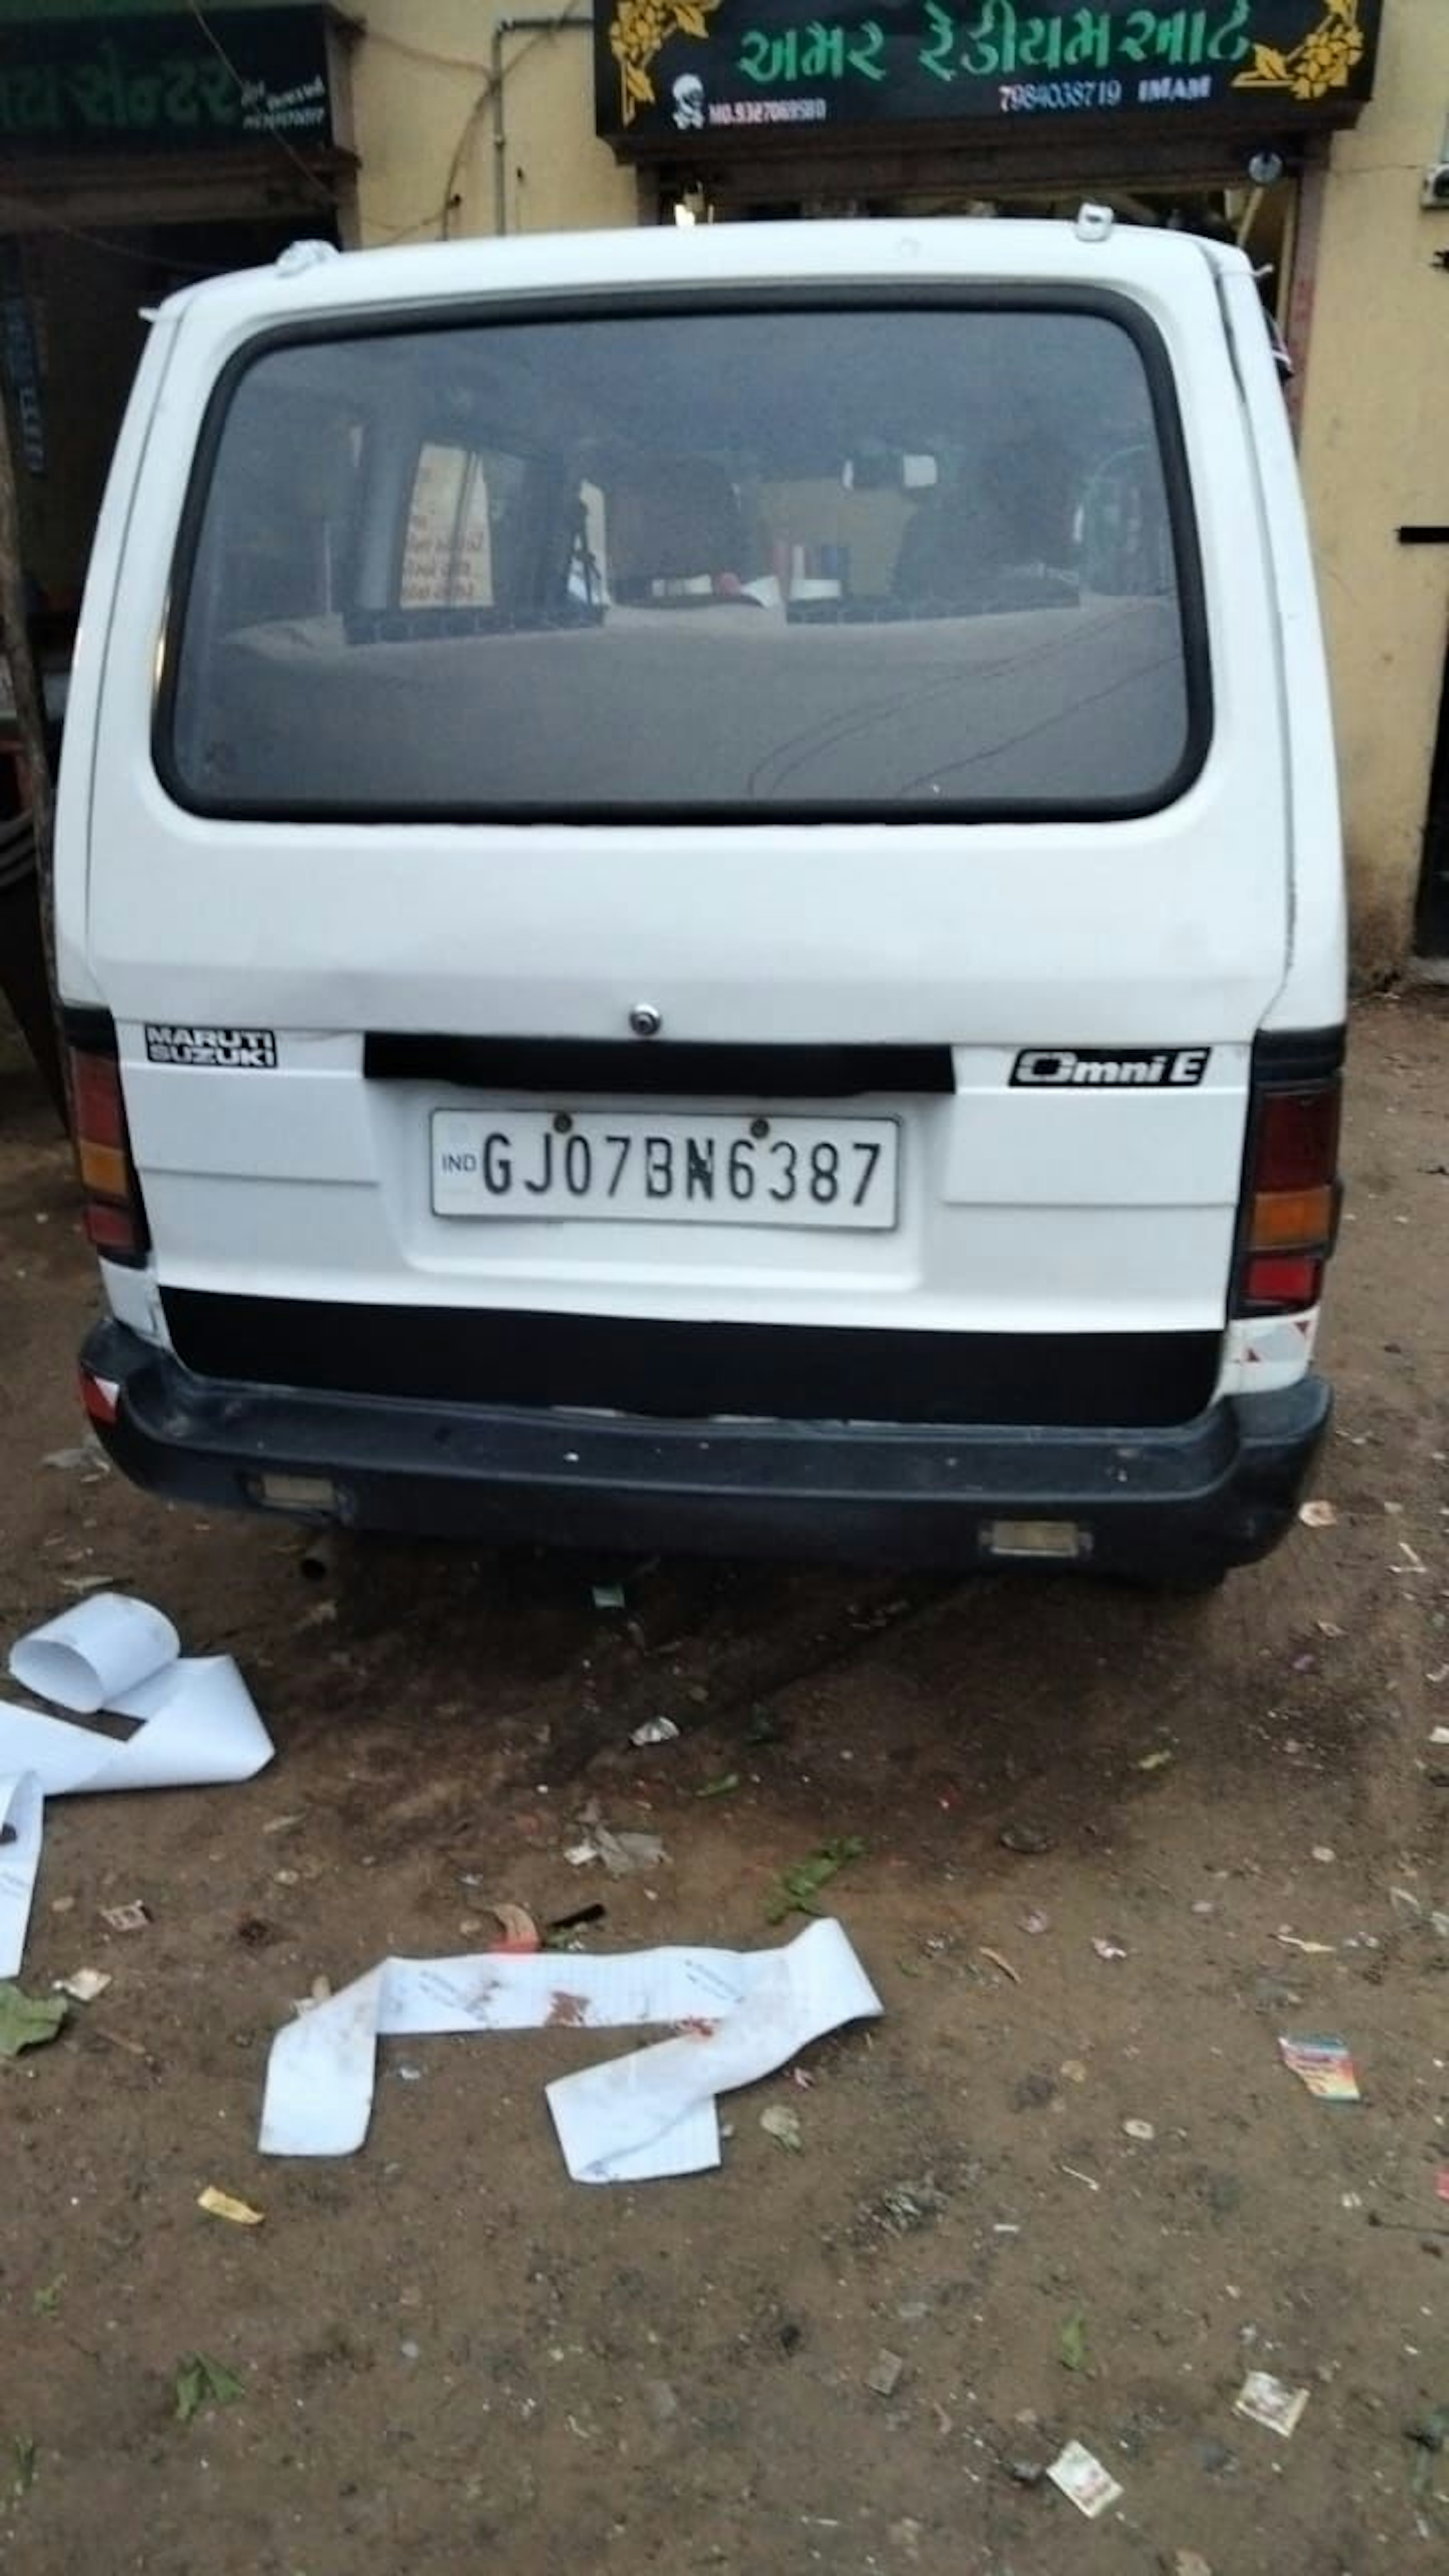 View - Omni E Van photos, Omni E Van available in Ahmedabad, make deal in 150000